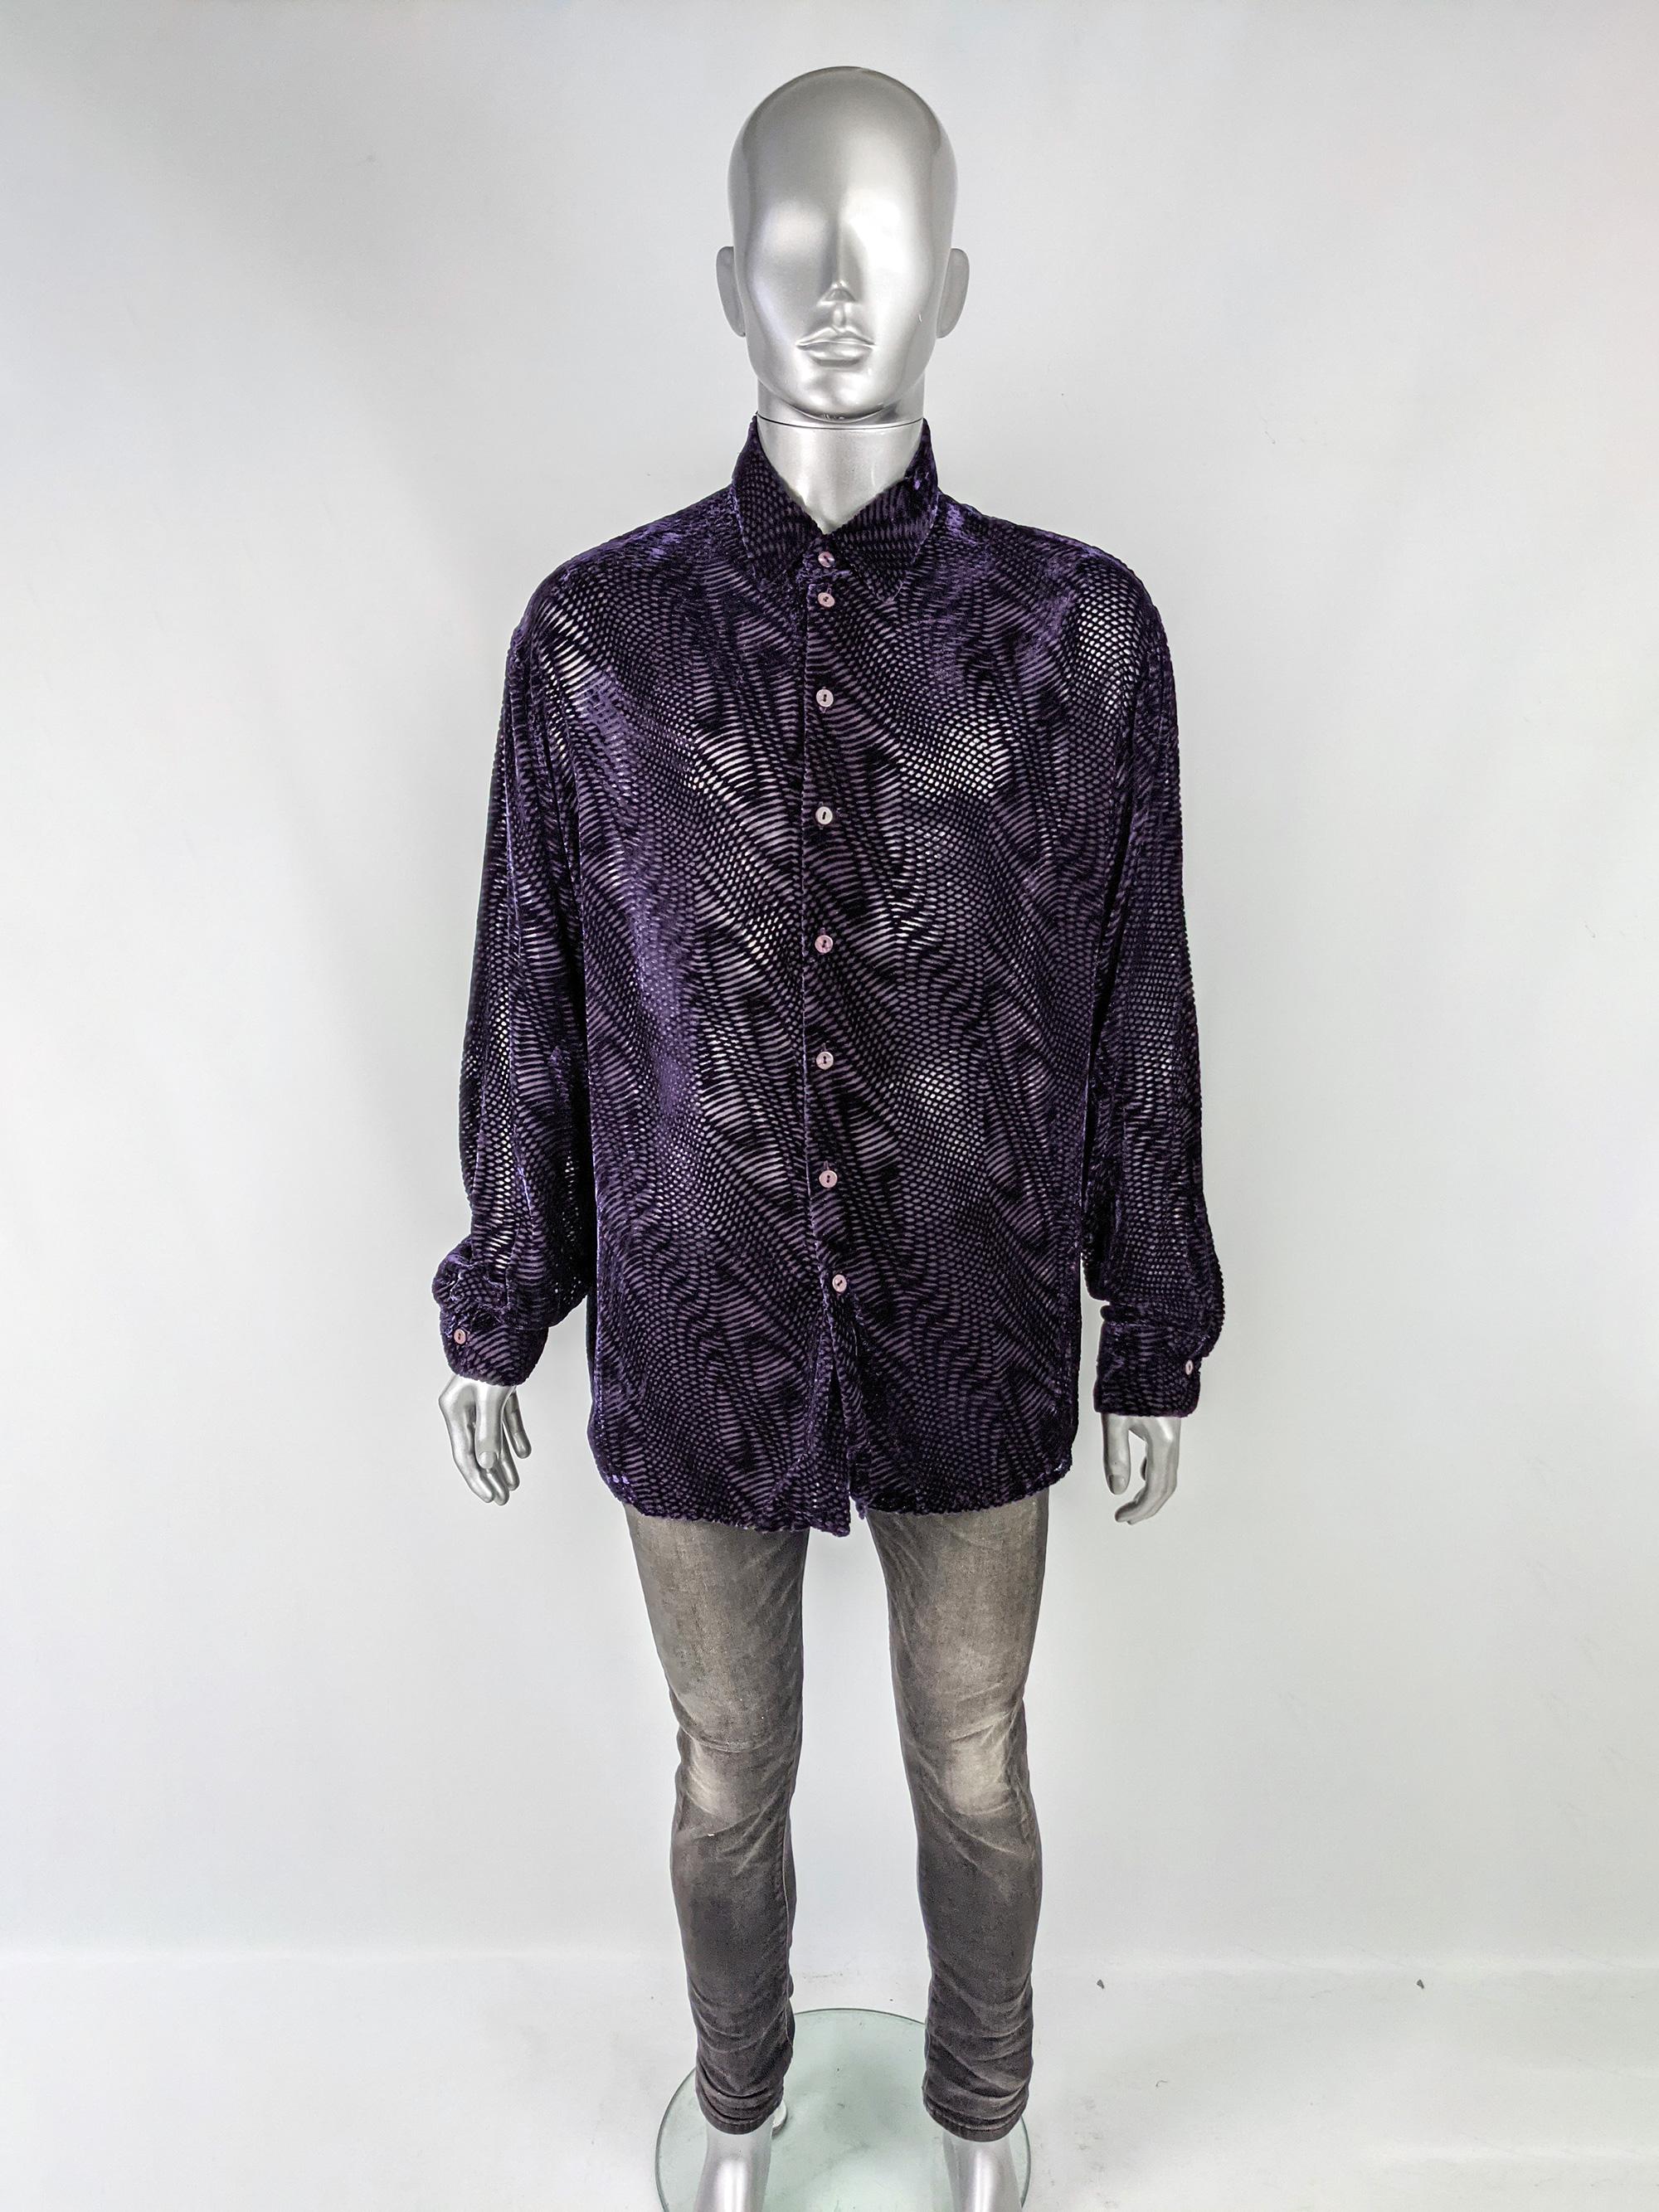 An incredible vintage mens shirt from the 90s by luxury British label, English Eccentrics, who were legendary for their luxe, experimental fabrics. In a dark purple silk and viscose blend, semi sheer devoré / burnout velvet fabric with an incredible